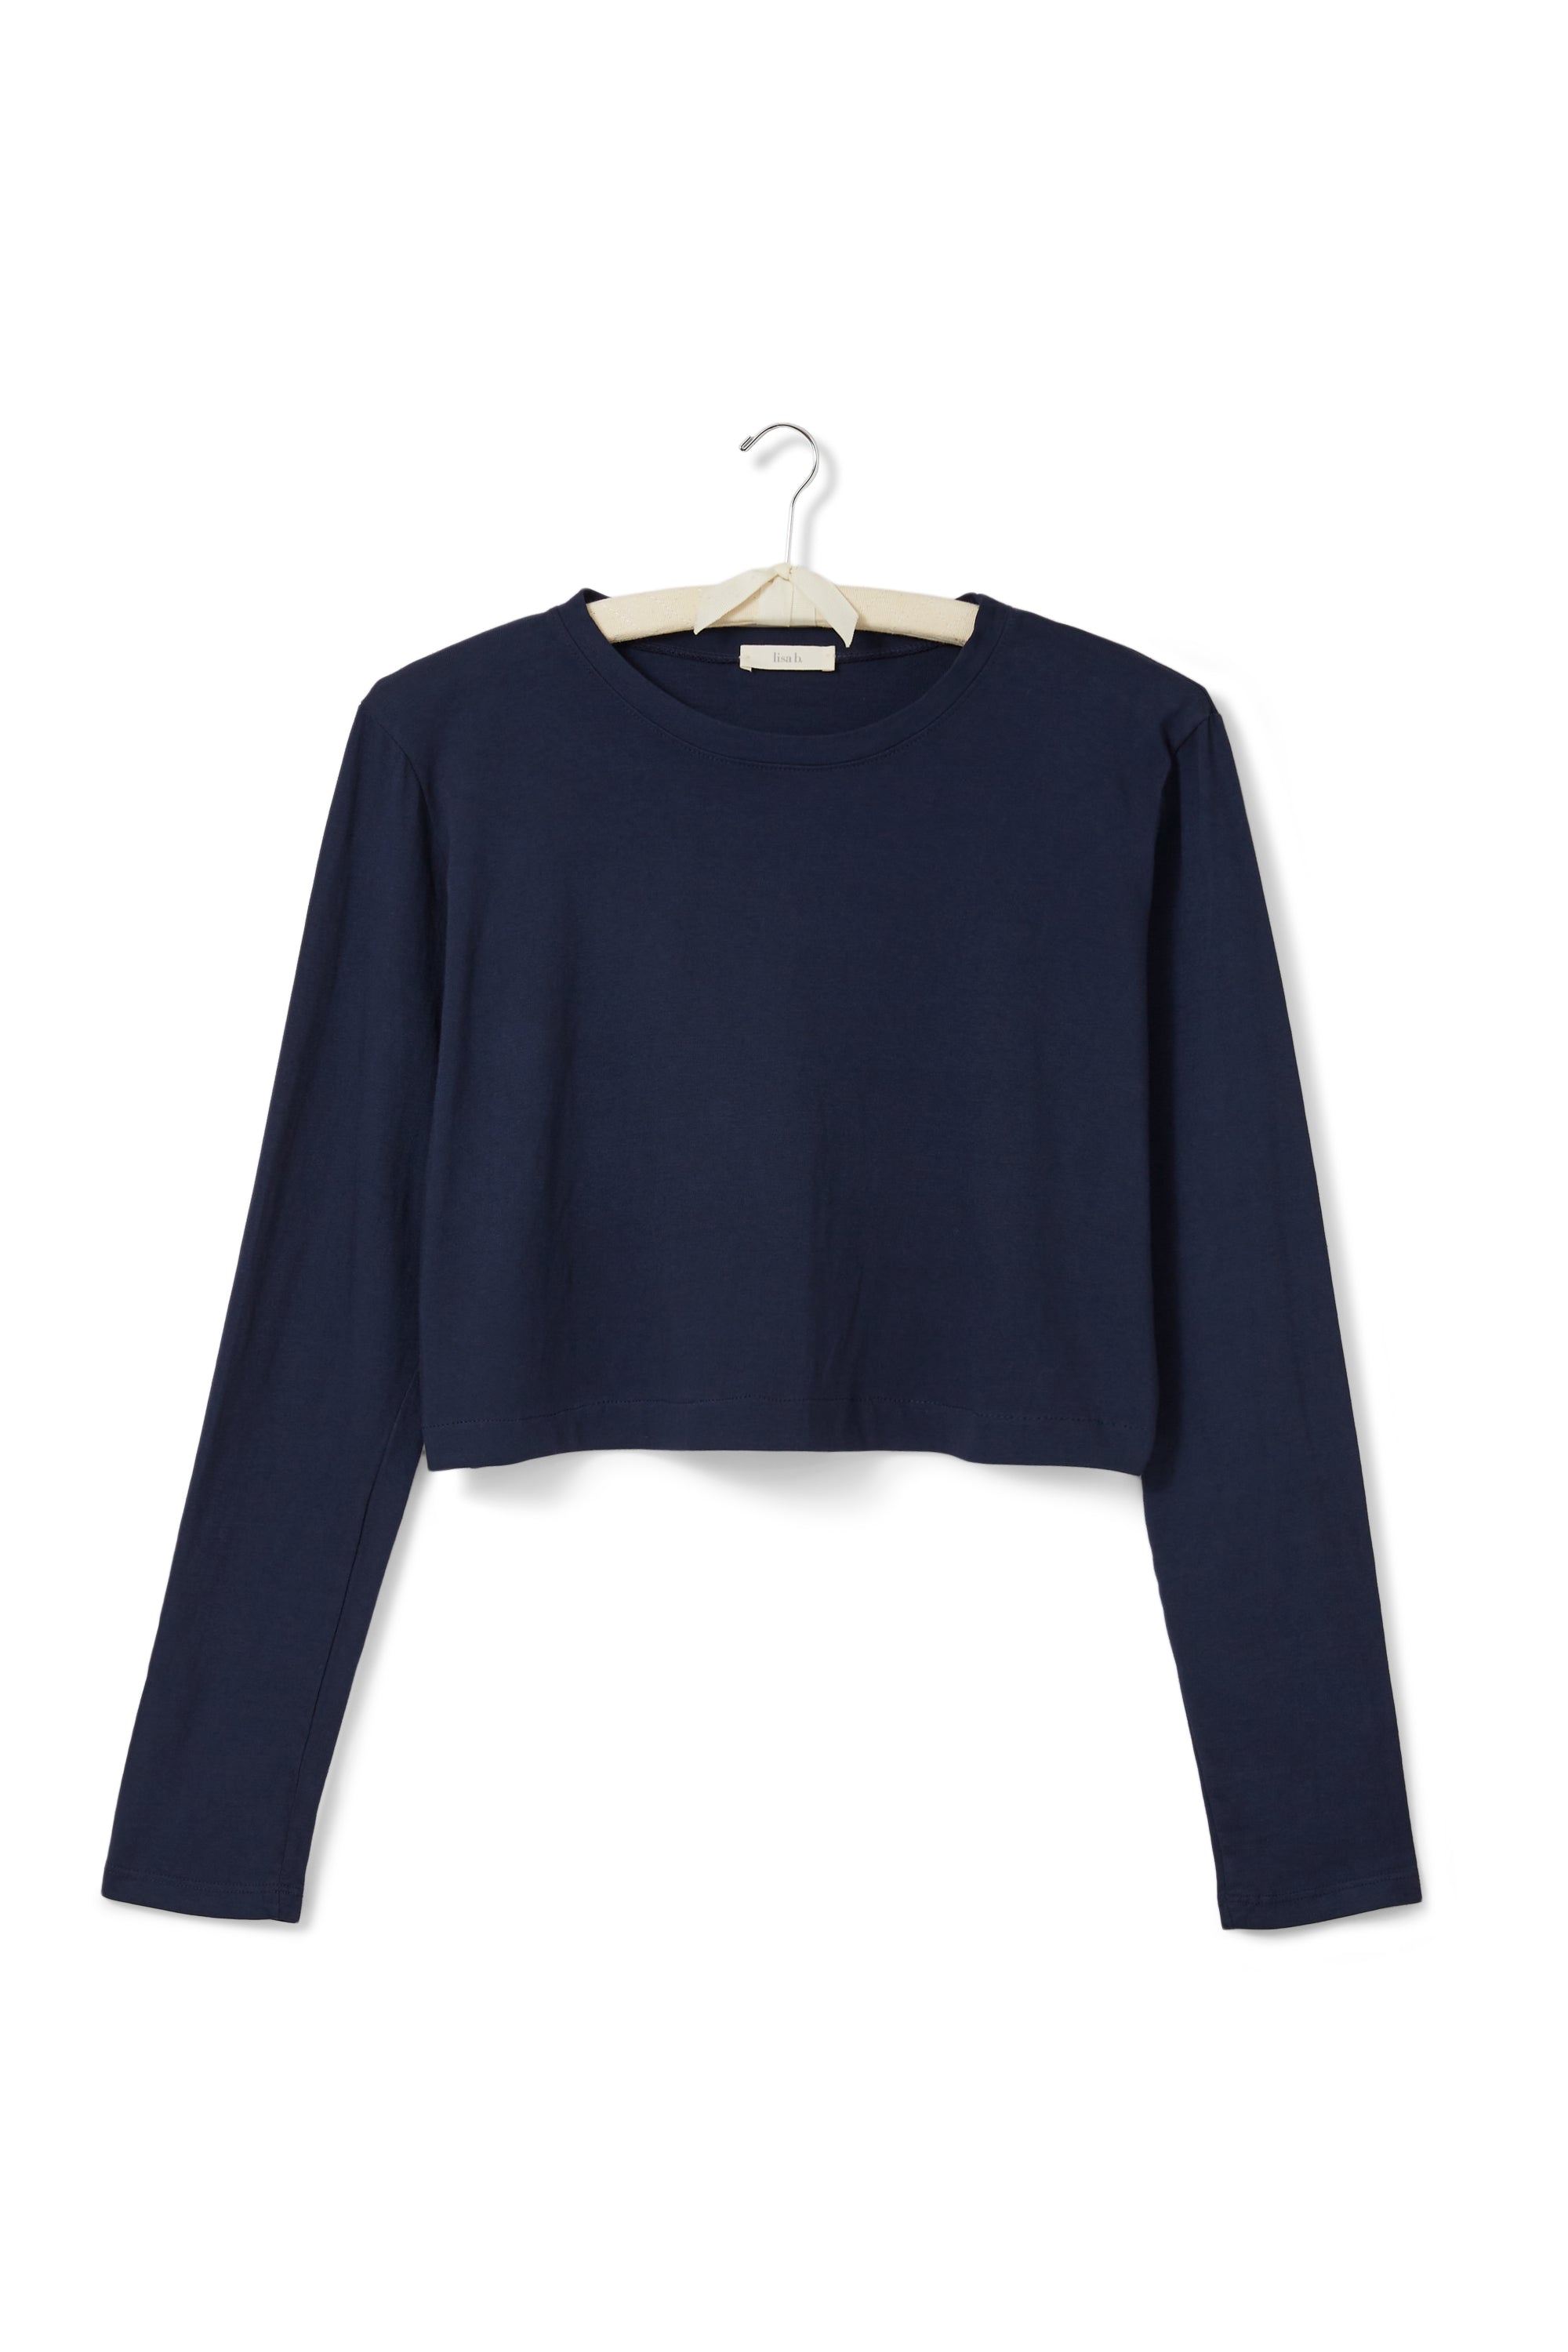 cropped long sleeve relaxed crew neck tee shirt